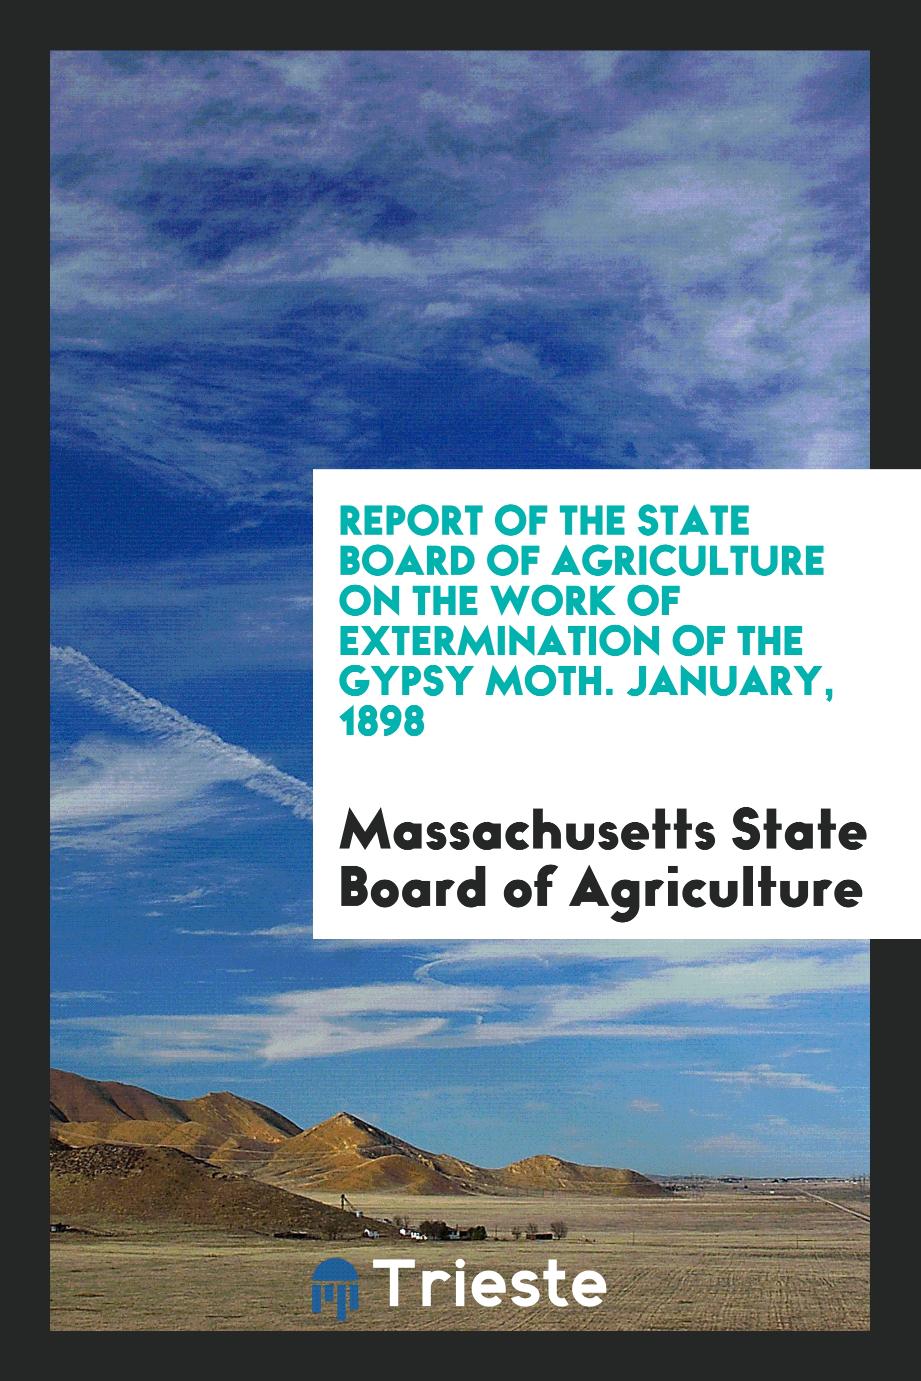 Report of the State Board of Agriculture on the Work of Extermination of the Gypsy Moth. January, 1898